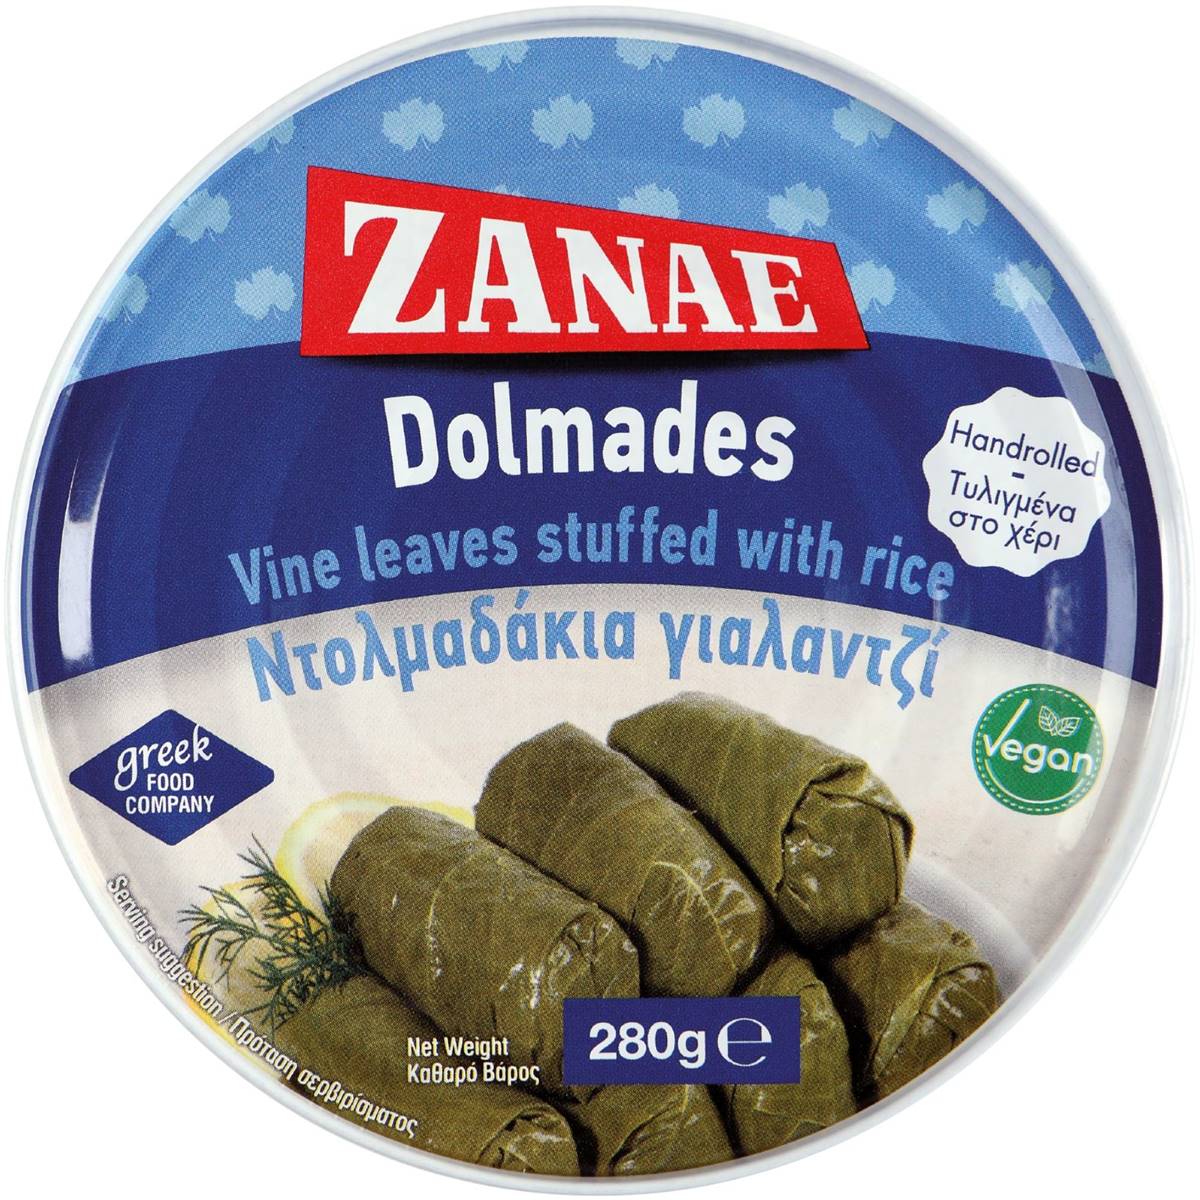 Calories in Zanae Dolmades Vine Leaves Stuffed With Rice